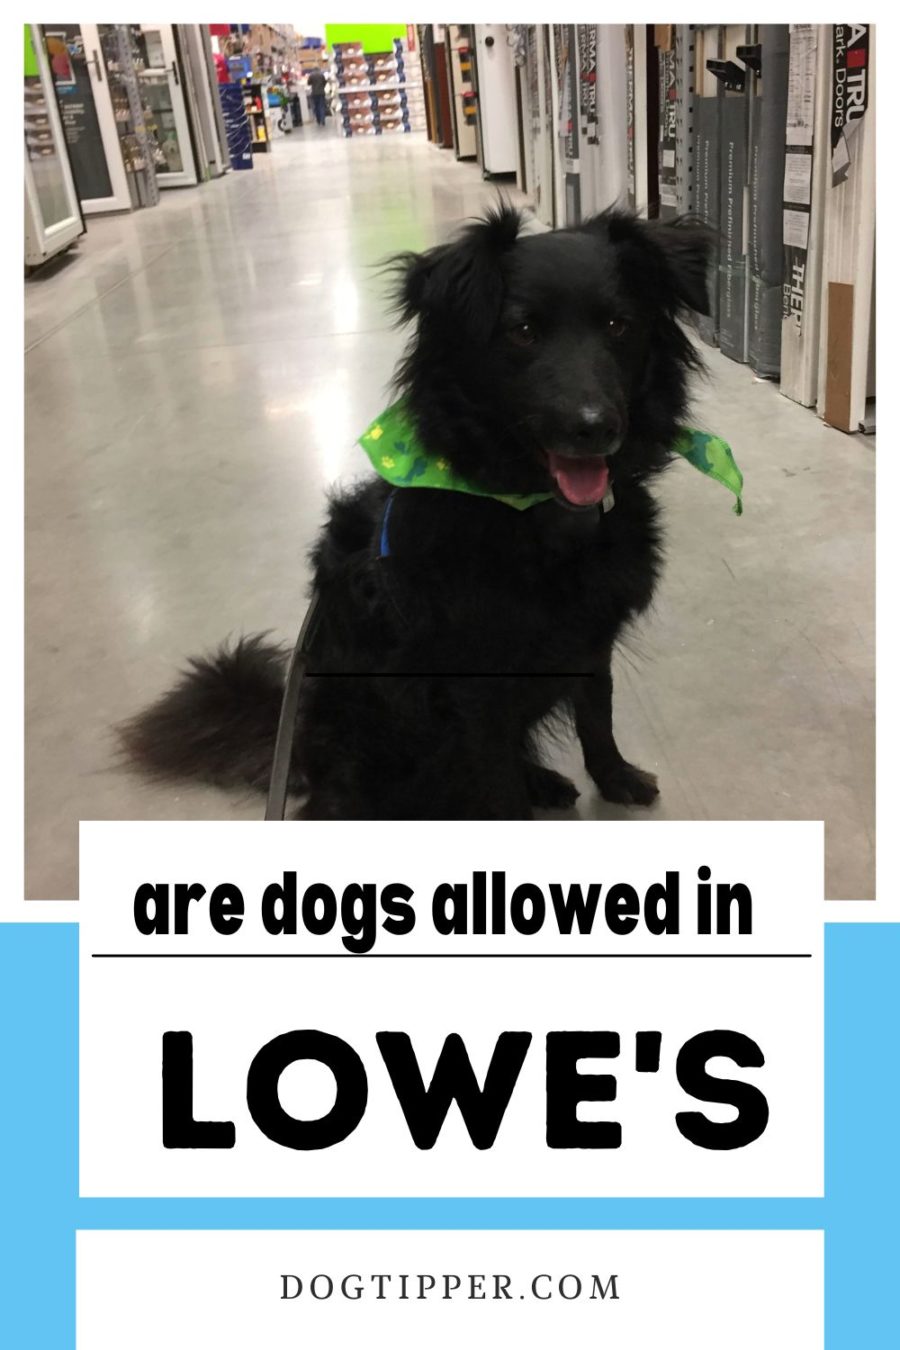 Are Dogs Allowed in Lowe's? What you should know about bringing your dog to a Lowes home improvement store.